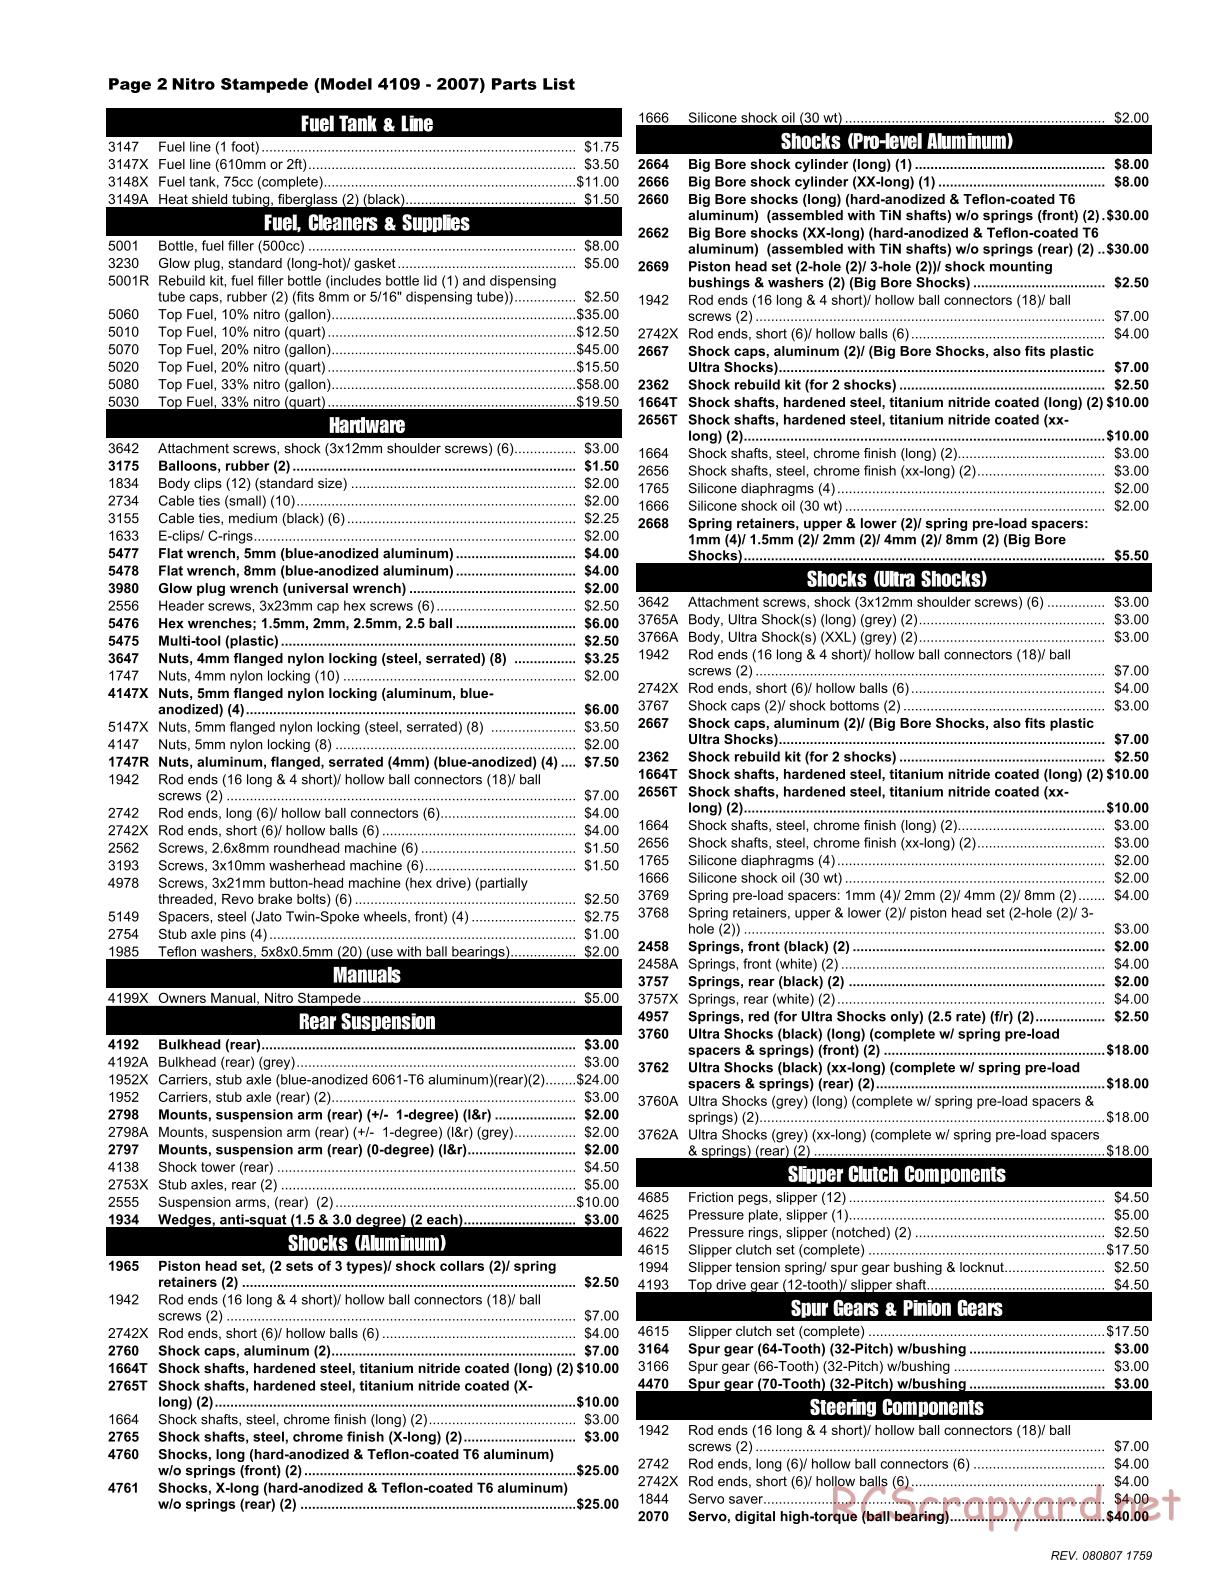 Traxxas - Nitro Stampede (2007) - Parts List - Page 2